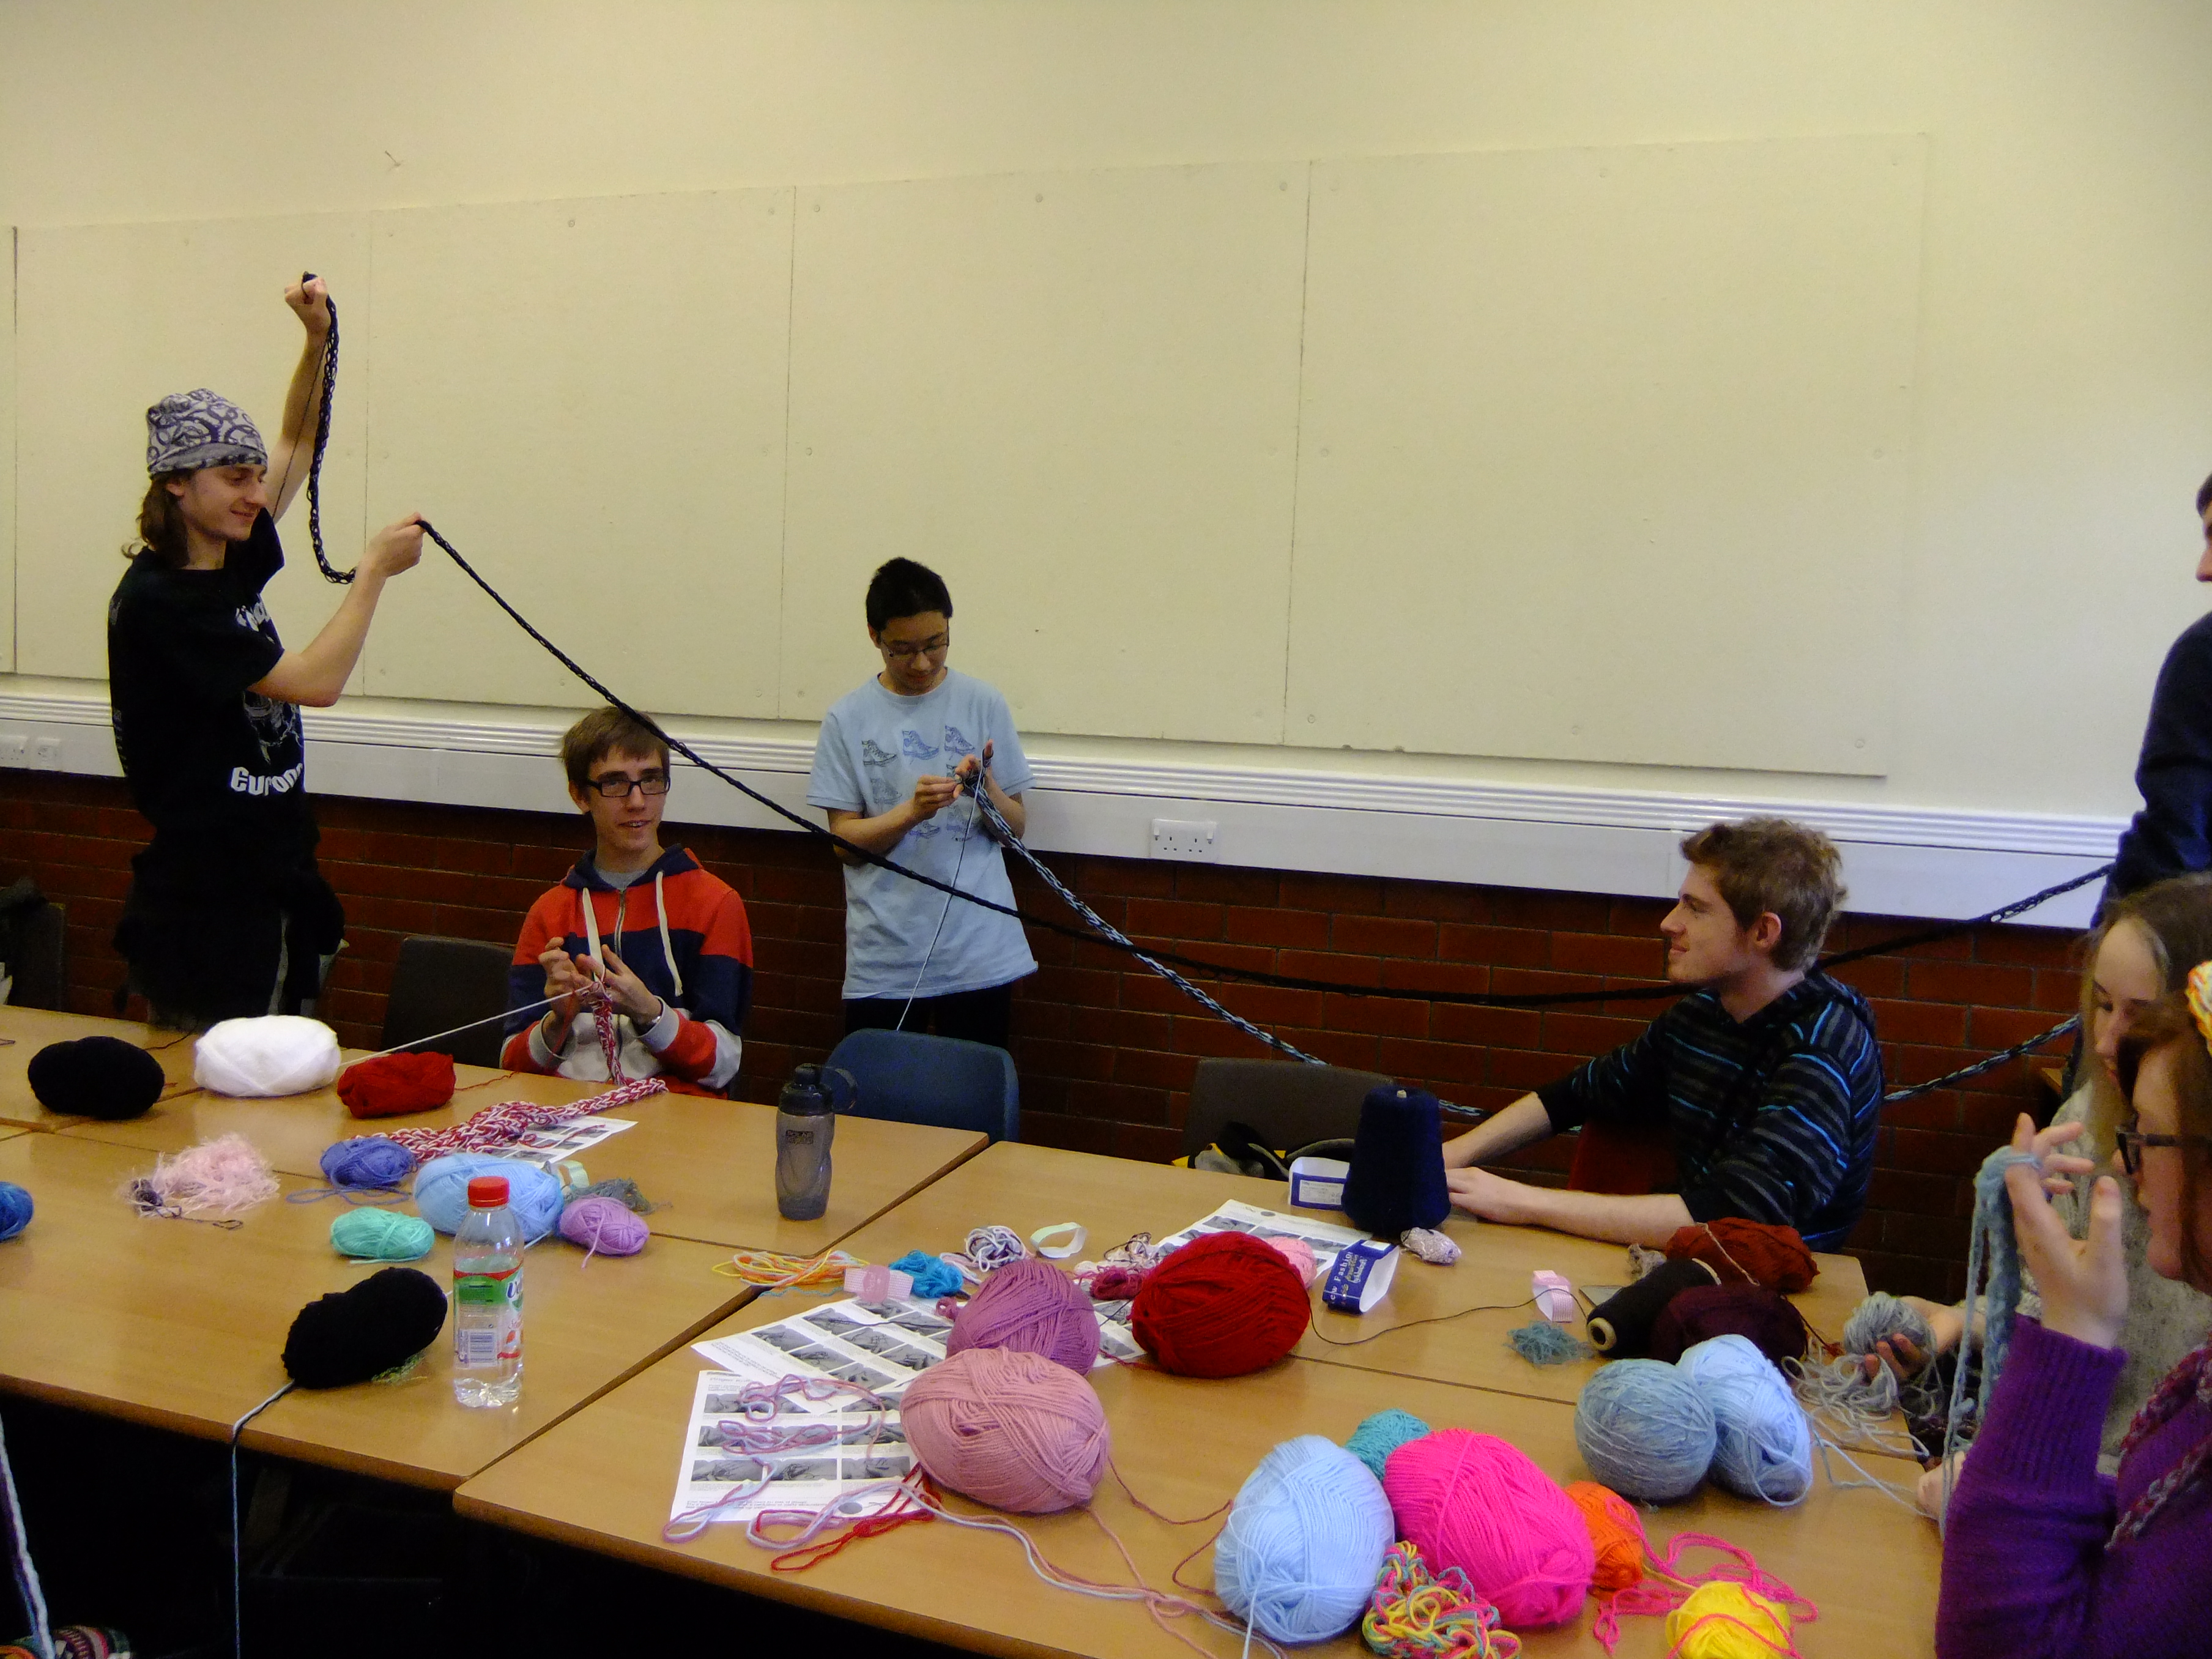 Workshops & Courses with Debbie Tomkies - Finger knitting for fun with secondary school students for an inspiration day